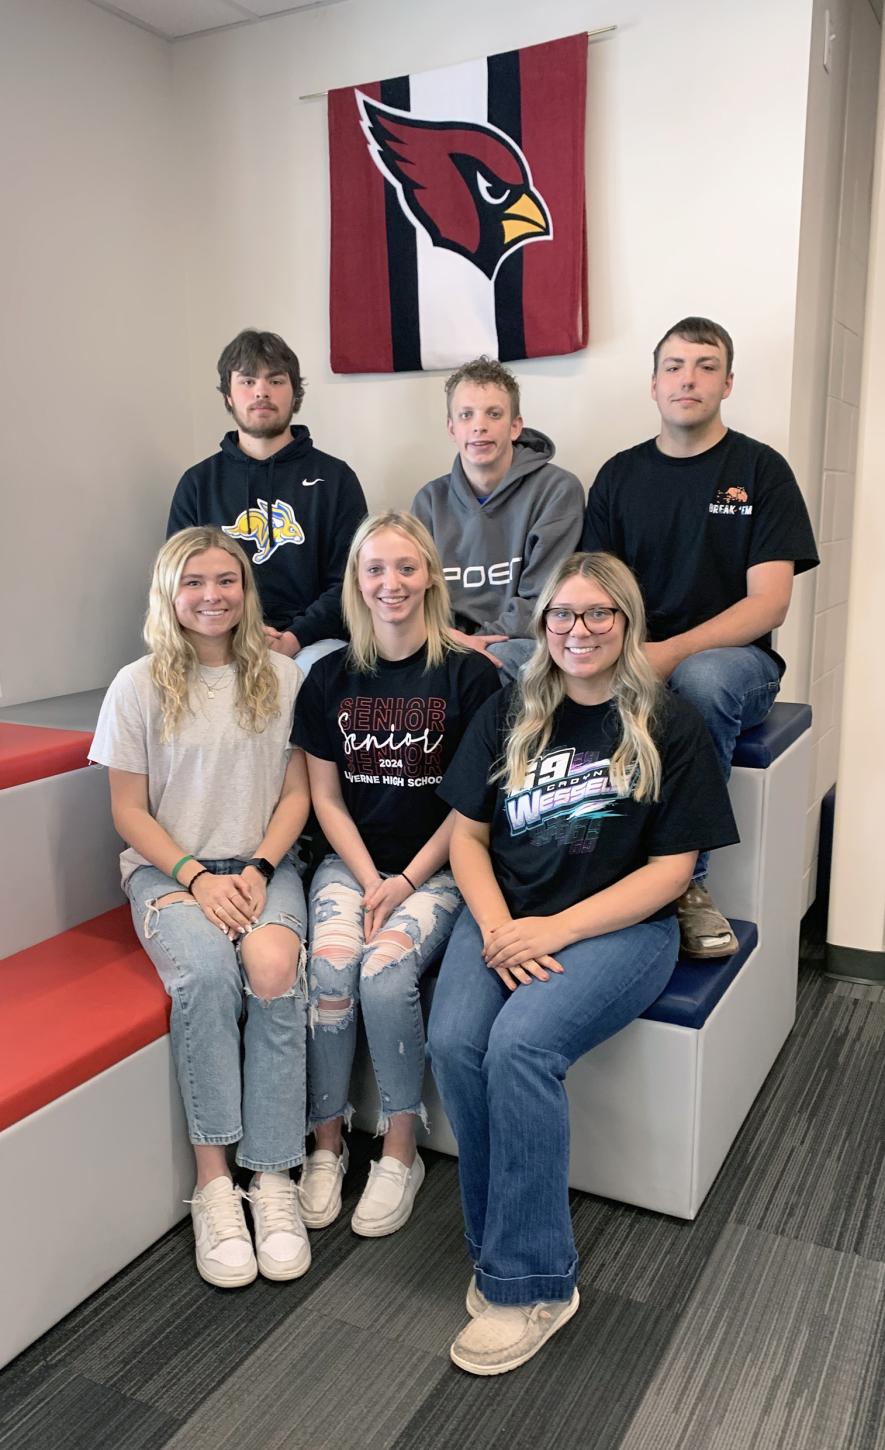 On Sunday three sets of twins will graduate from Luverne High School, the second consecutive year such an event has occurred. Pictured sitting with their twin behind them are (from left) Tori and Will Serie, Josie and Jack Voorhees and Izabel and Samuel Honerman. Mavis Fodness/Rock County Star Herald Photo